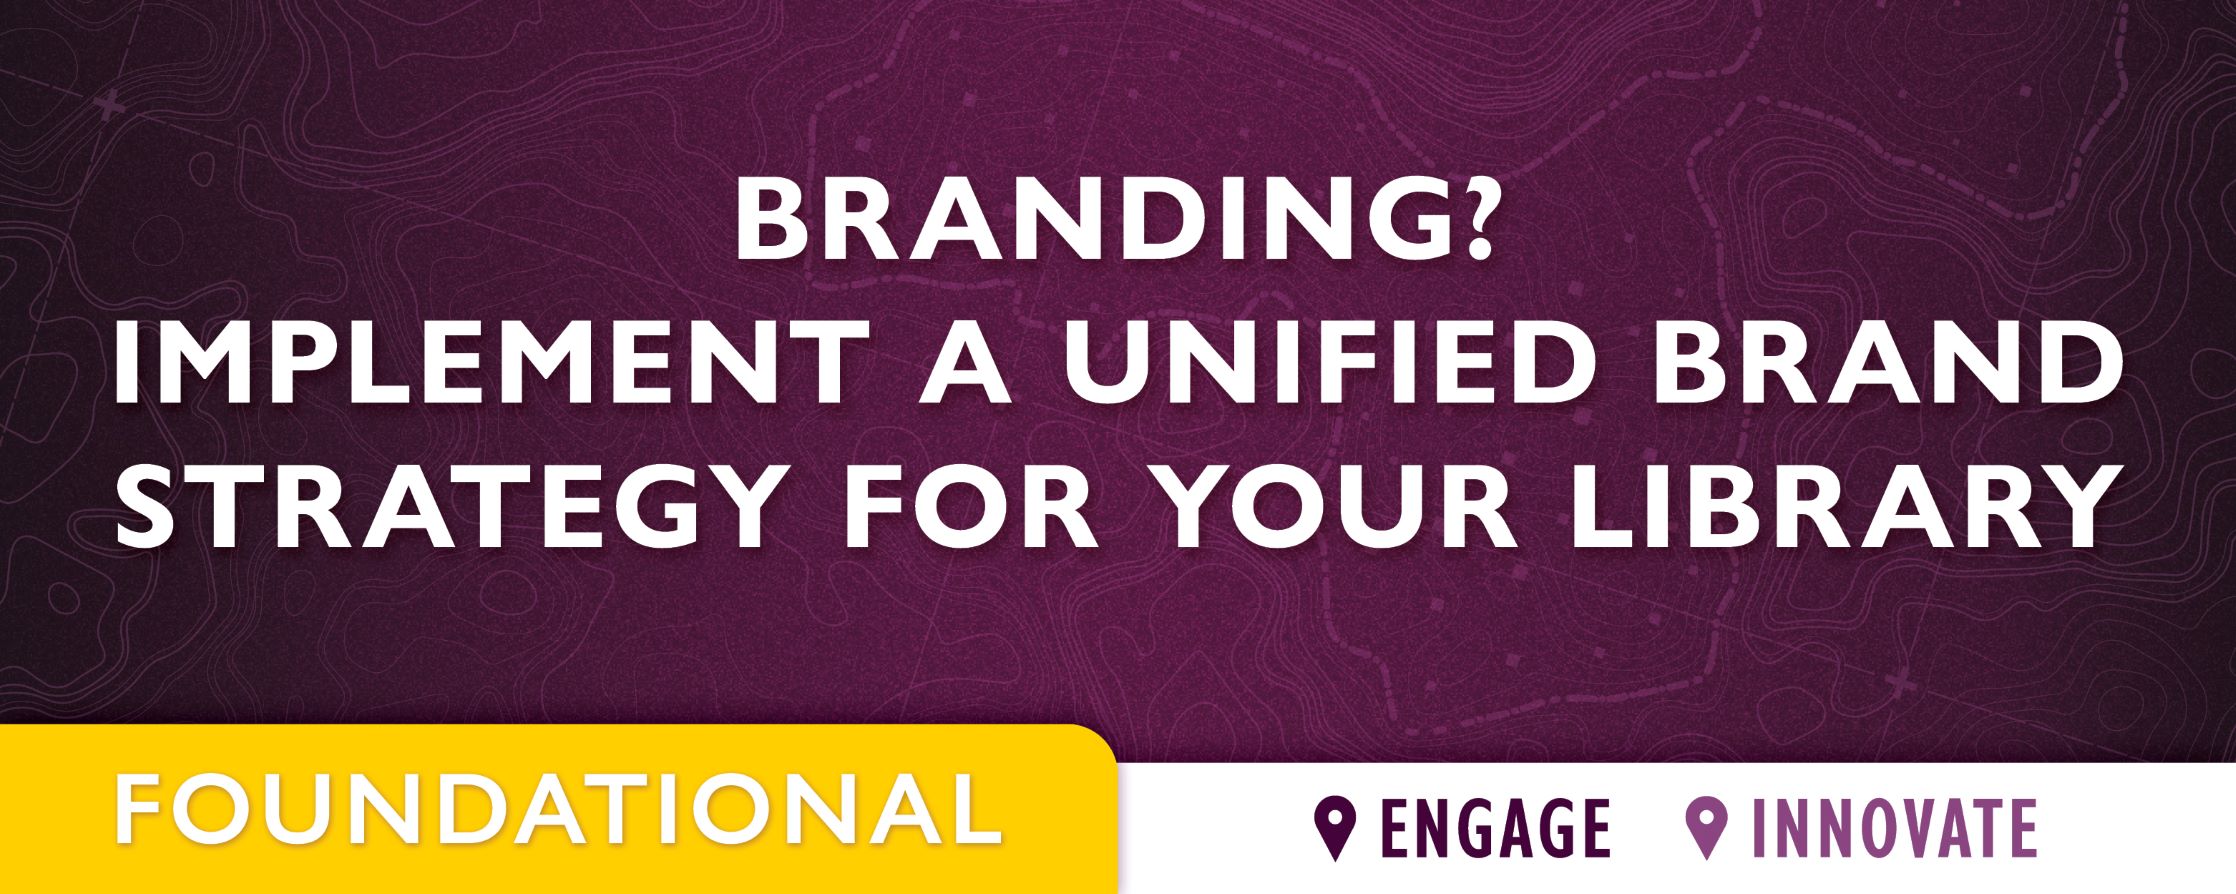 purple background with text: Branding? Implement a Unified Brand Strategy for Your Library 